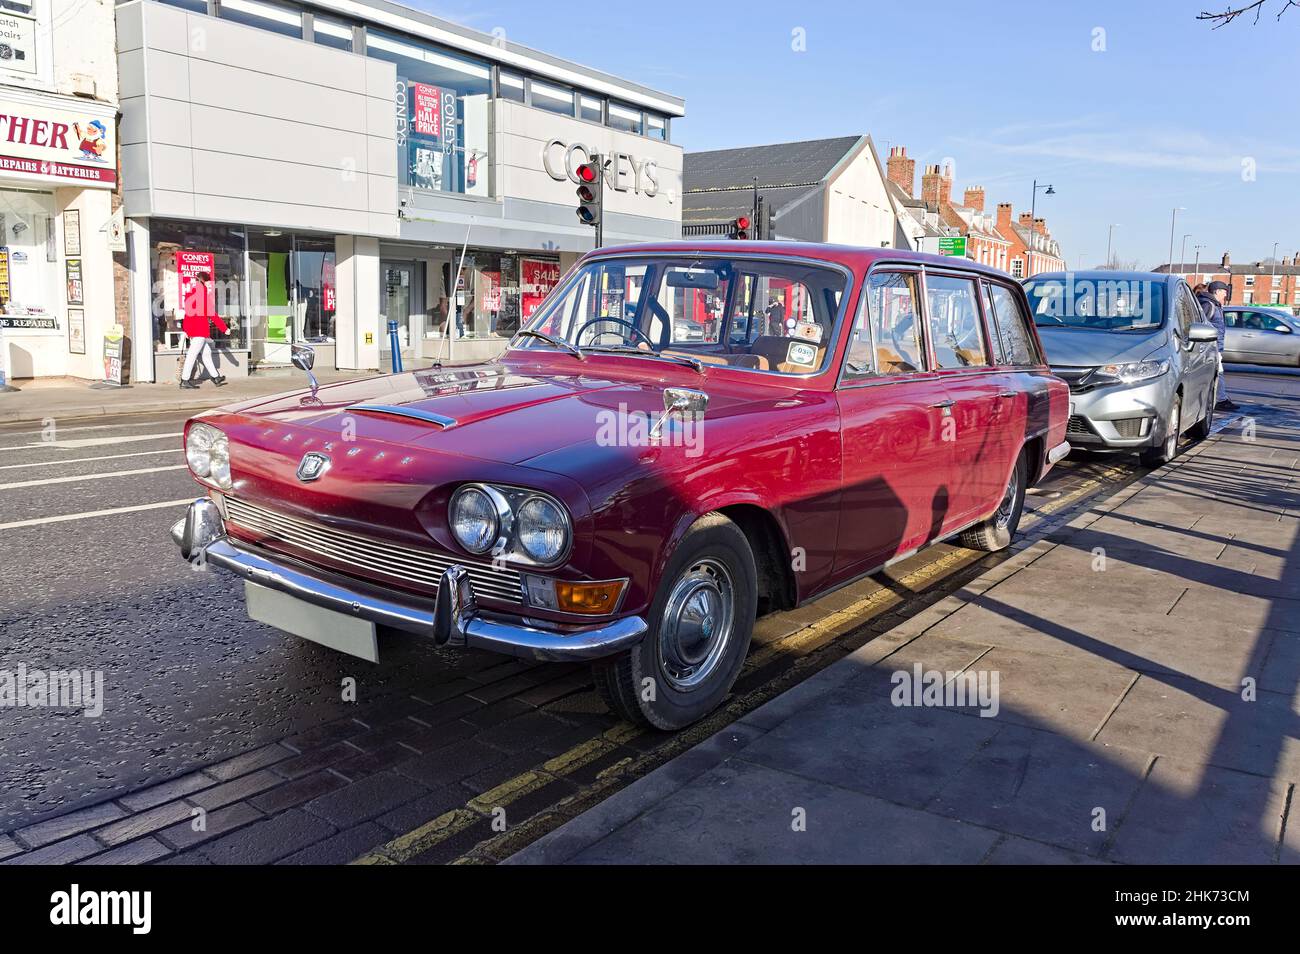 a rare Triumph 2000 MK1 Estate car (1965-1969) parked on double yellow lines Stock Photo